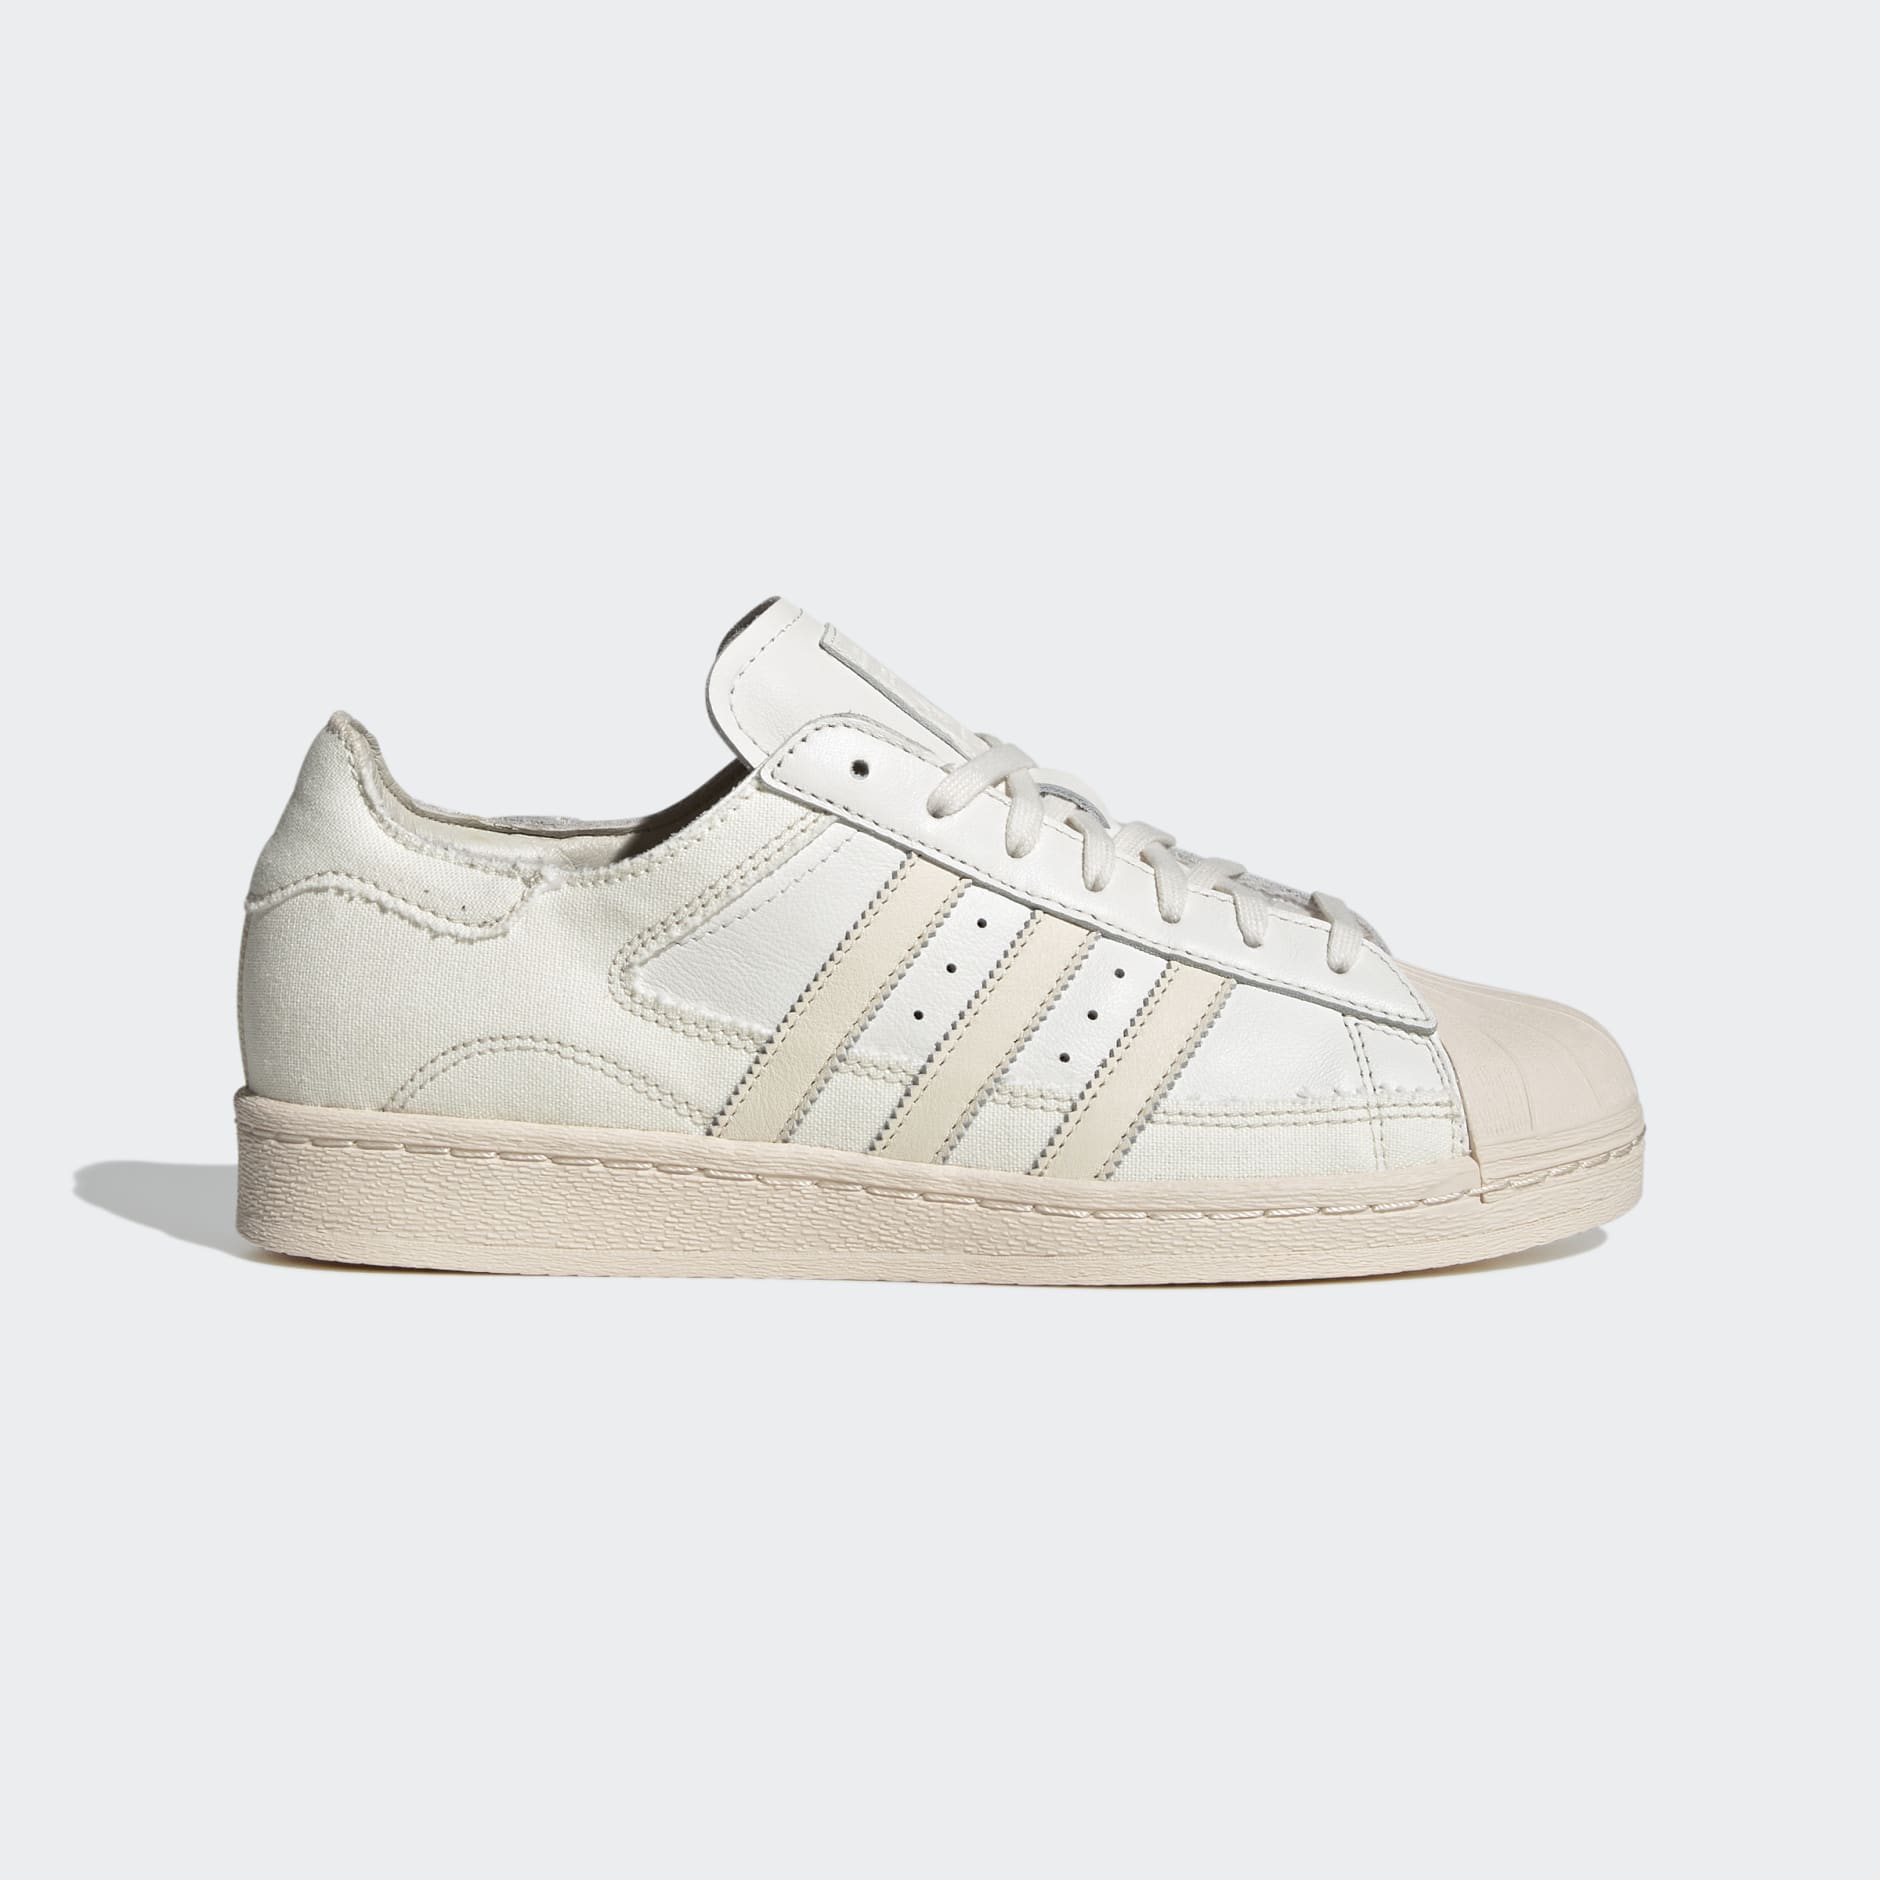 11 Best White adidas Sneakers